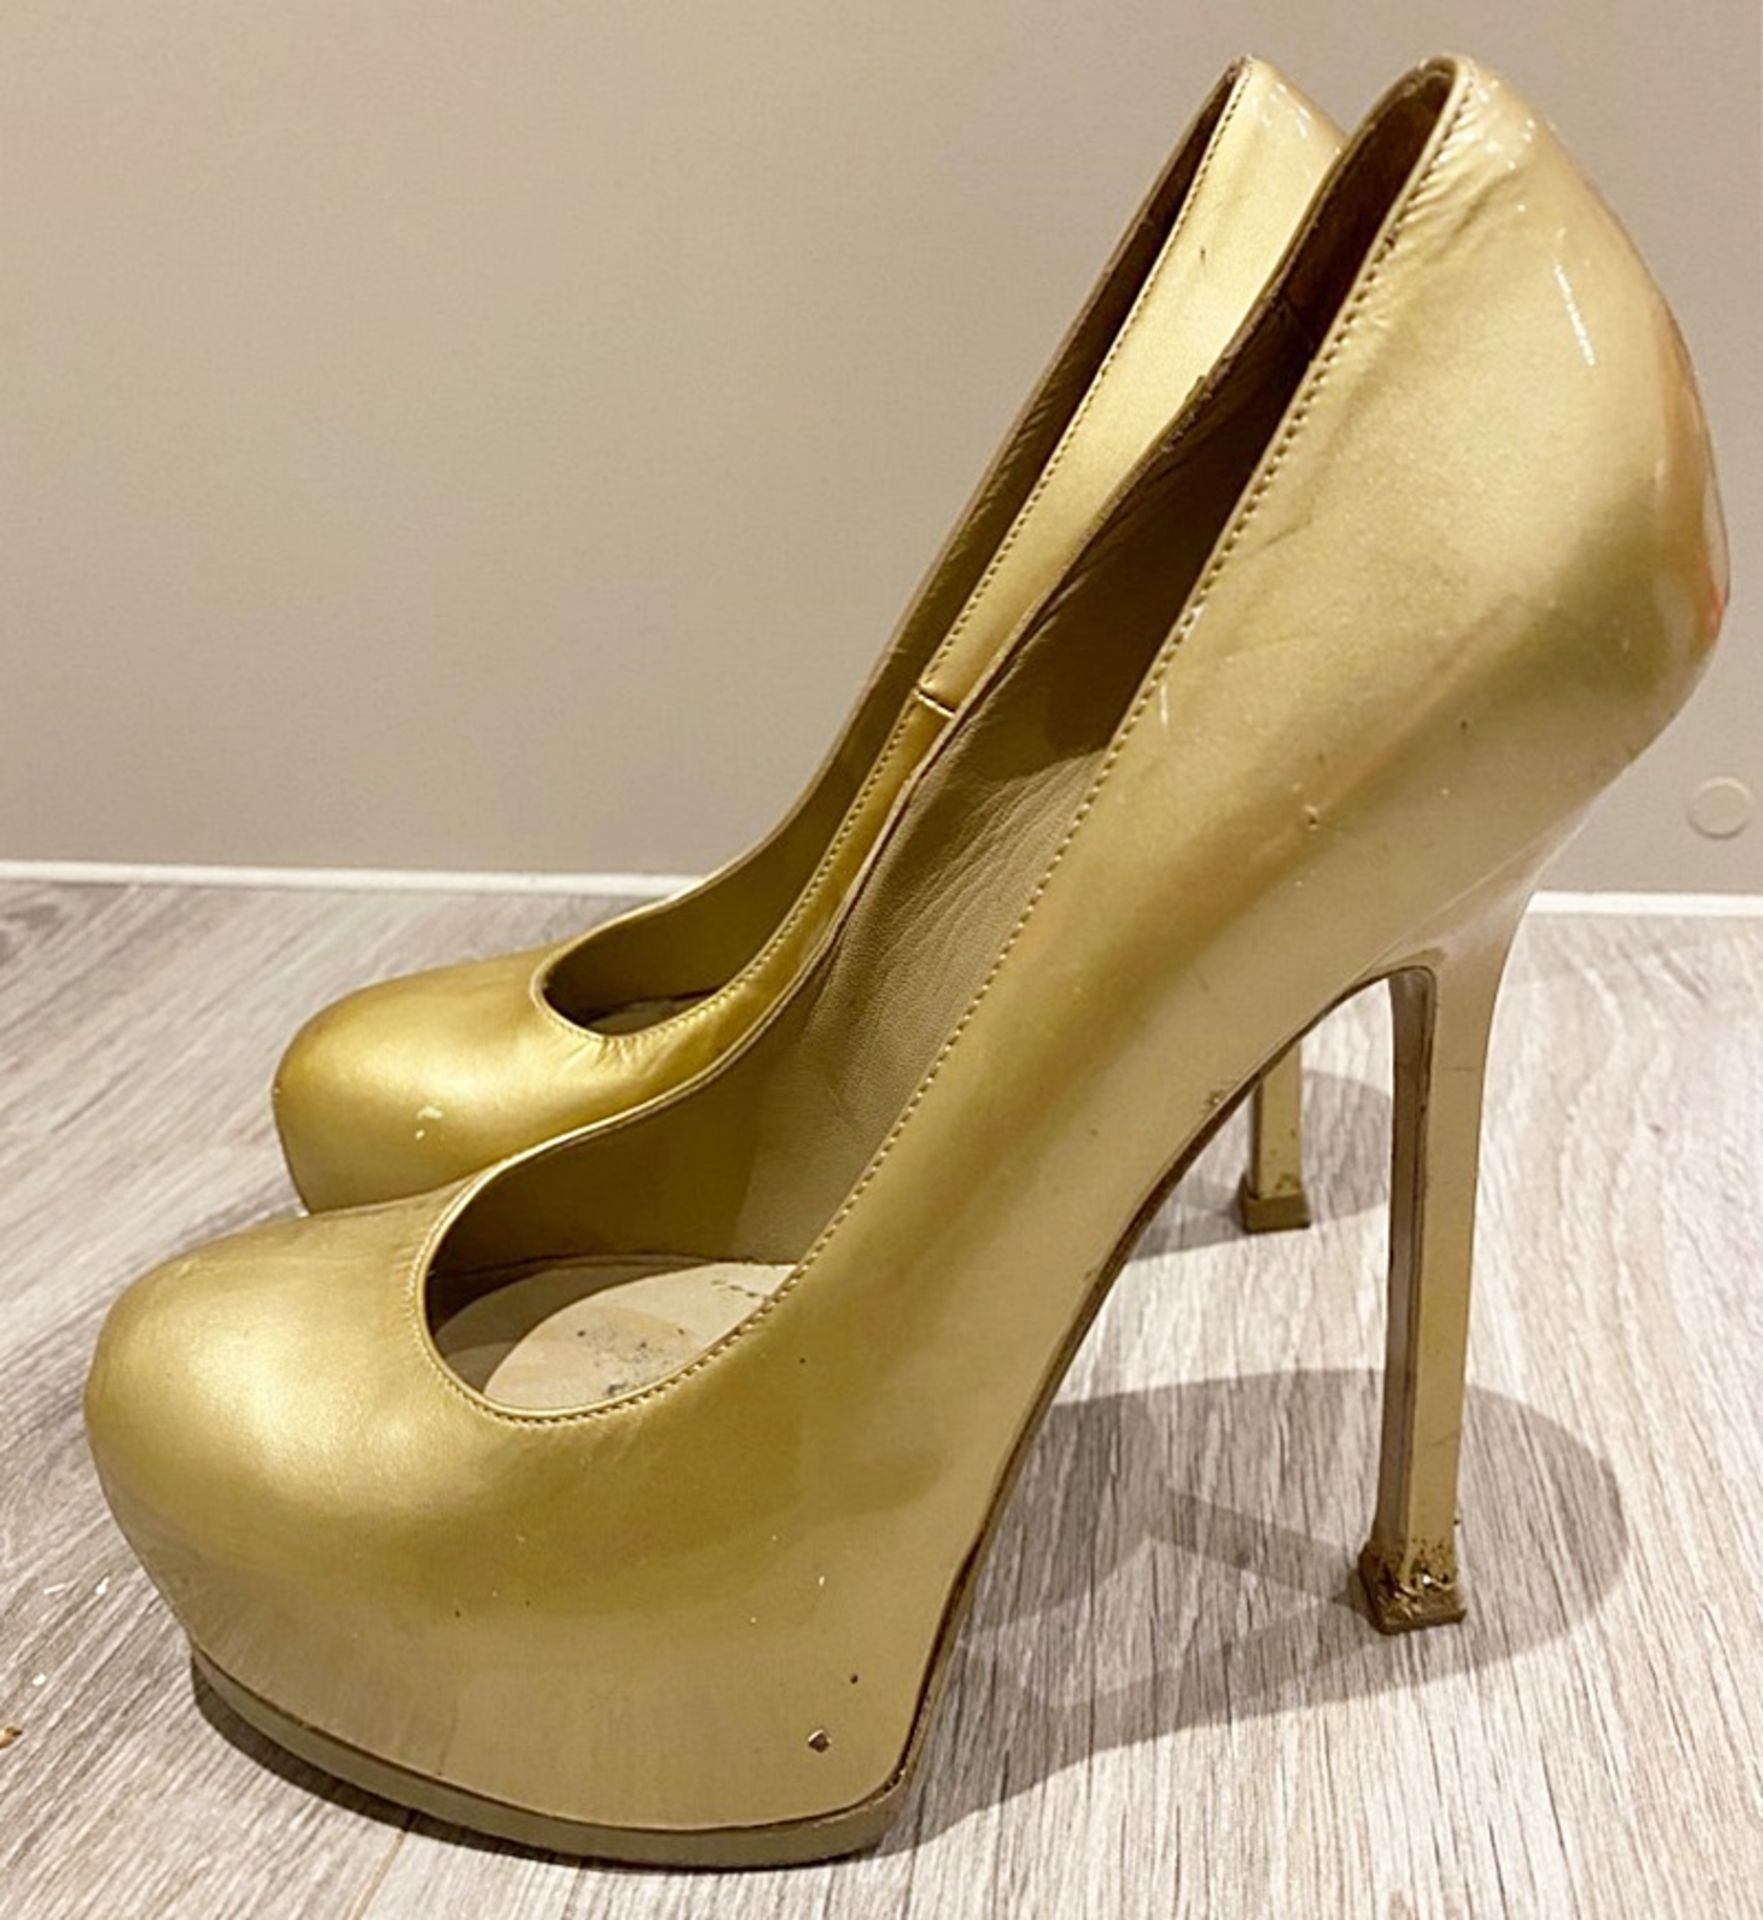 1 x Pair Of Genuine YSL High Heel Shoes In Gold - Size: 36 - Preowned in Worn Condition - Ref: LOT52